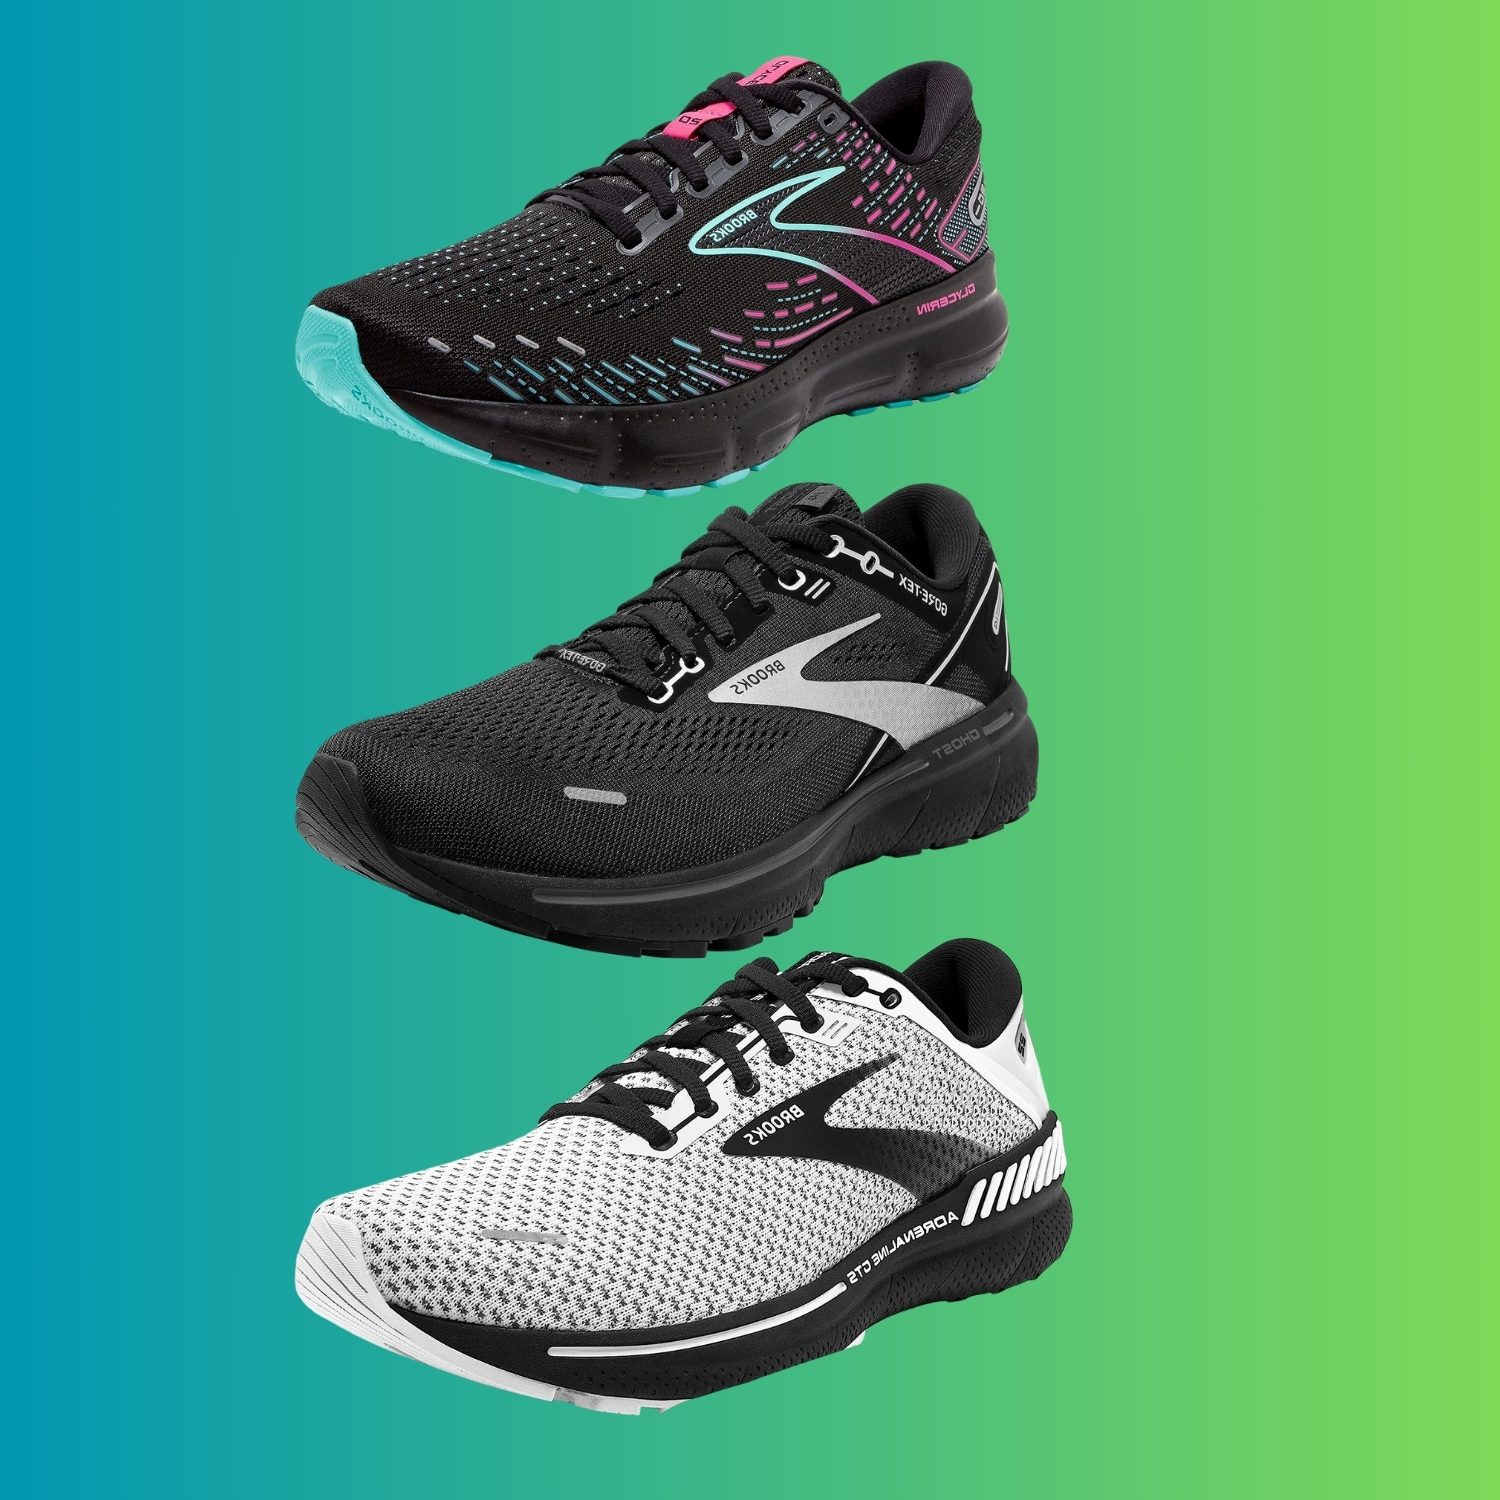 8 Best Brooks Shoes for Standing All Day-Unbelievably Comfy Brooks Shoes!